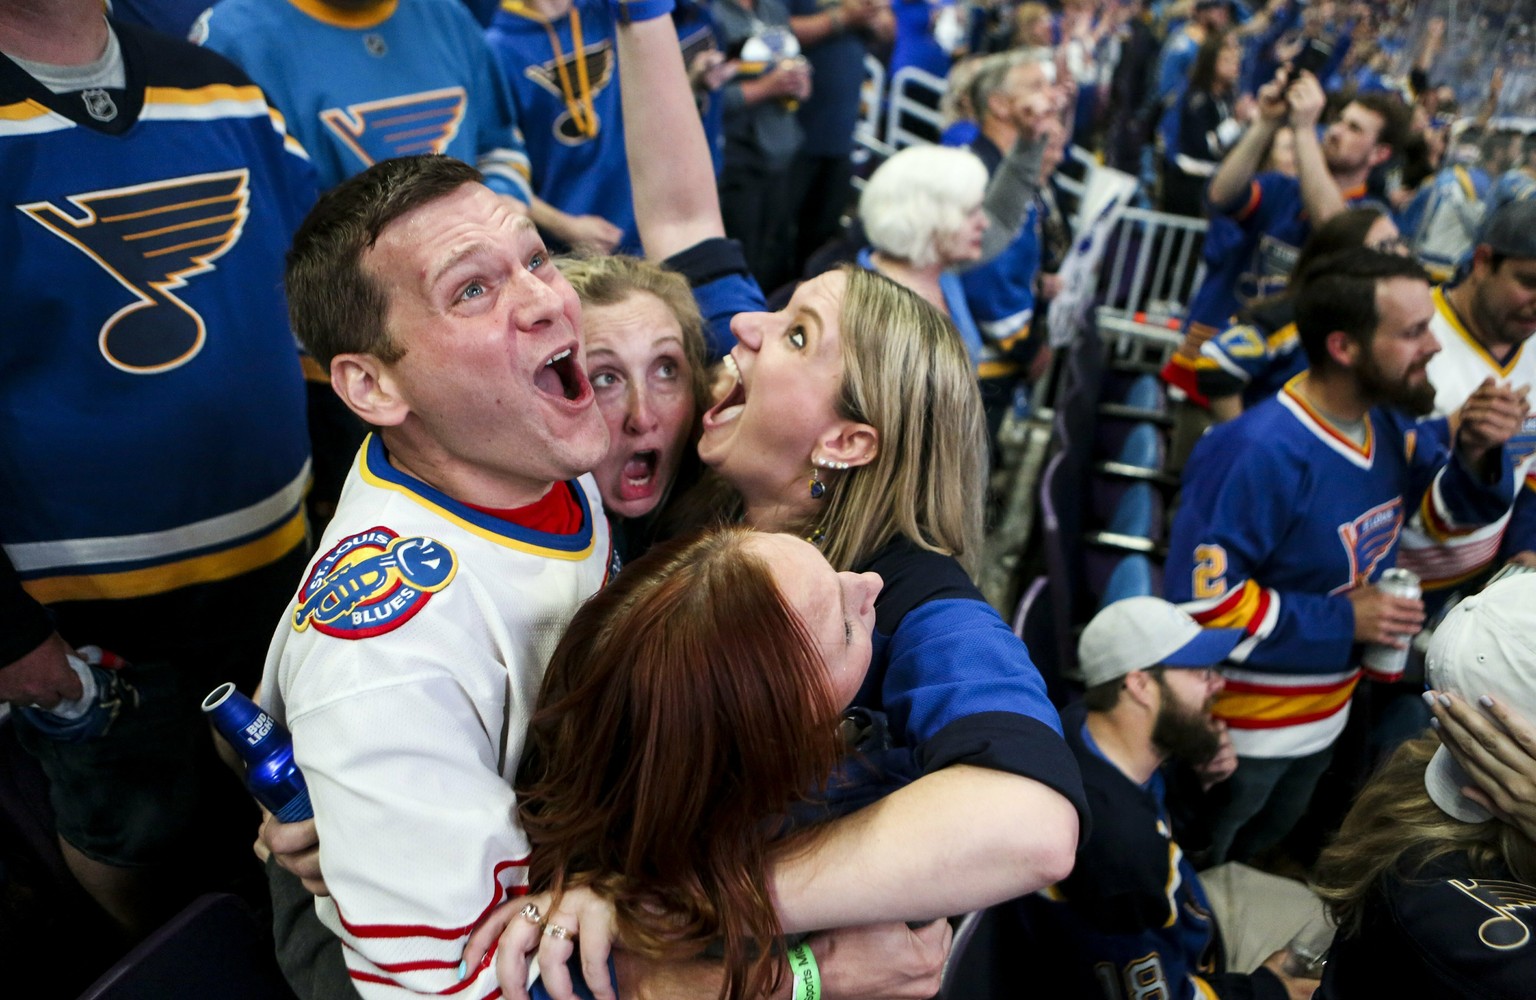 Bill Kess, left, and his friends react as the clock hits zero and the St. Louis Blues win the Stanley Cup over the Boston Bruins in Boston, during a watch party Wednesday, June 12, 2019, at Enterprise ...